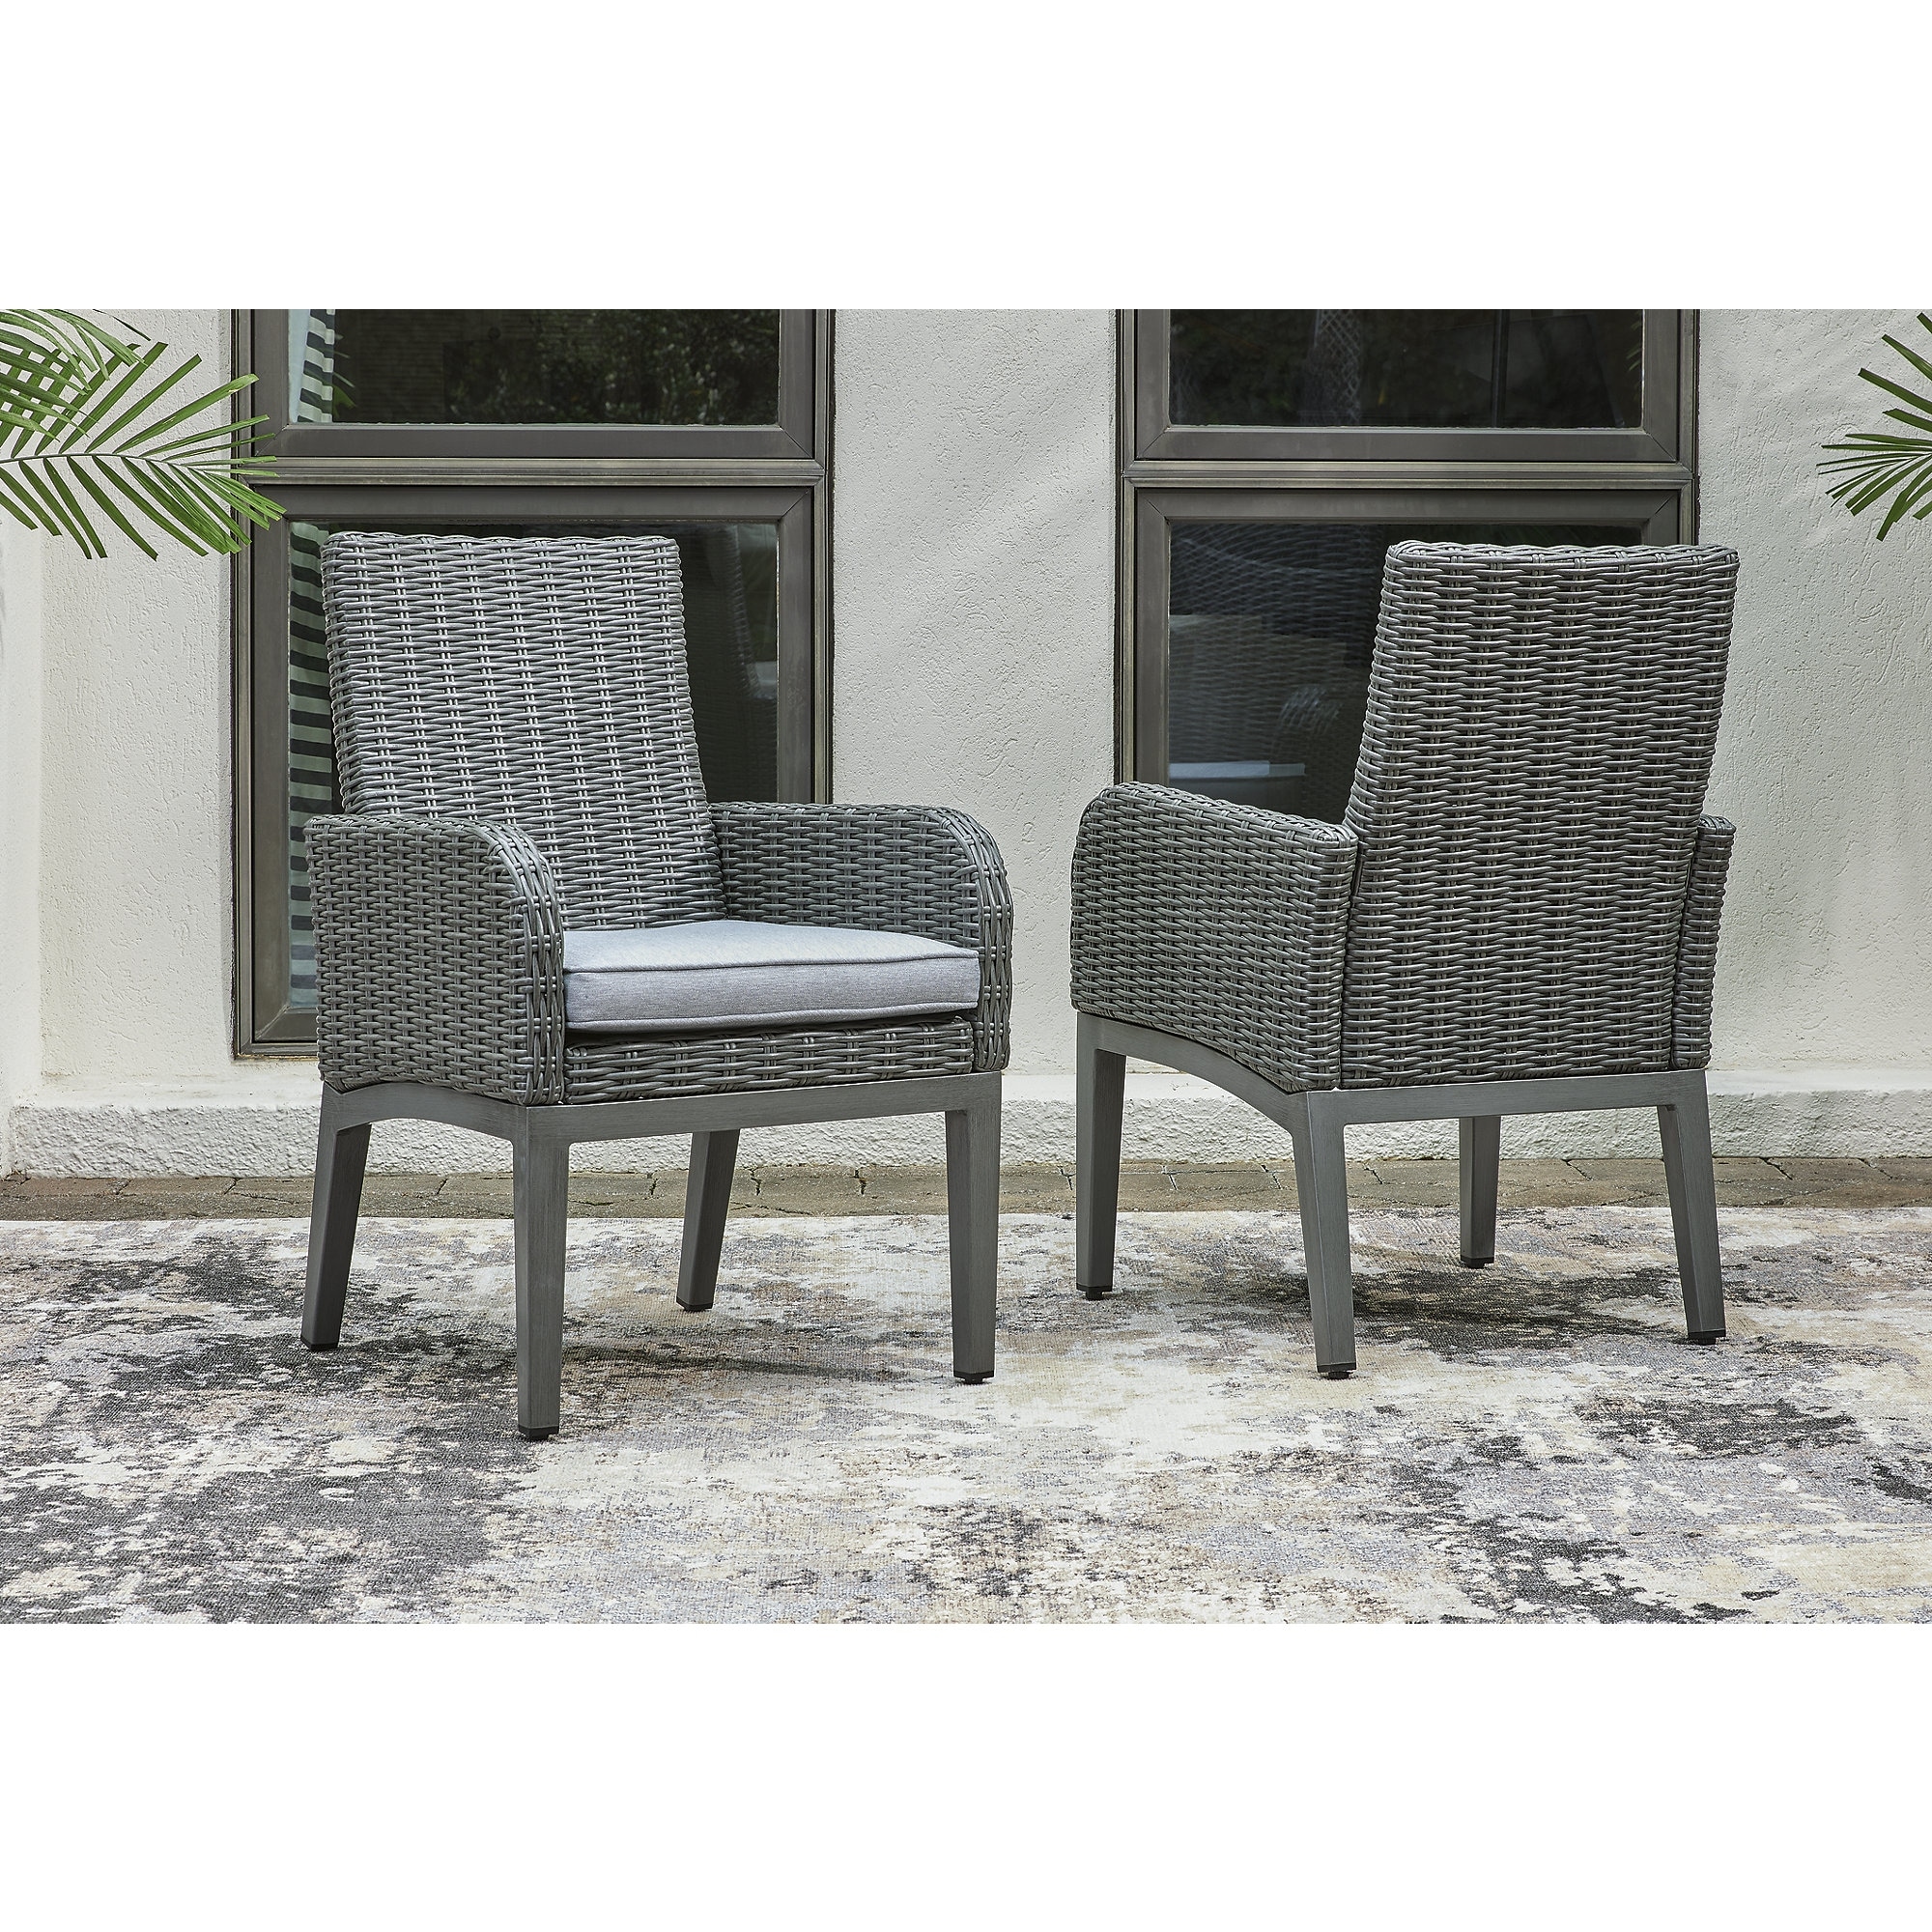 Signature Design By Ashley Elite Park Gray Arm Chair With Cushion (set Of 2) - 24w X 24d X 38h